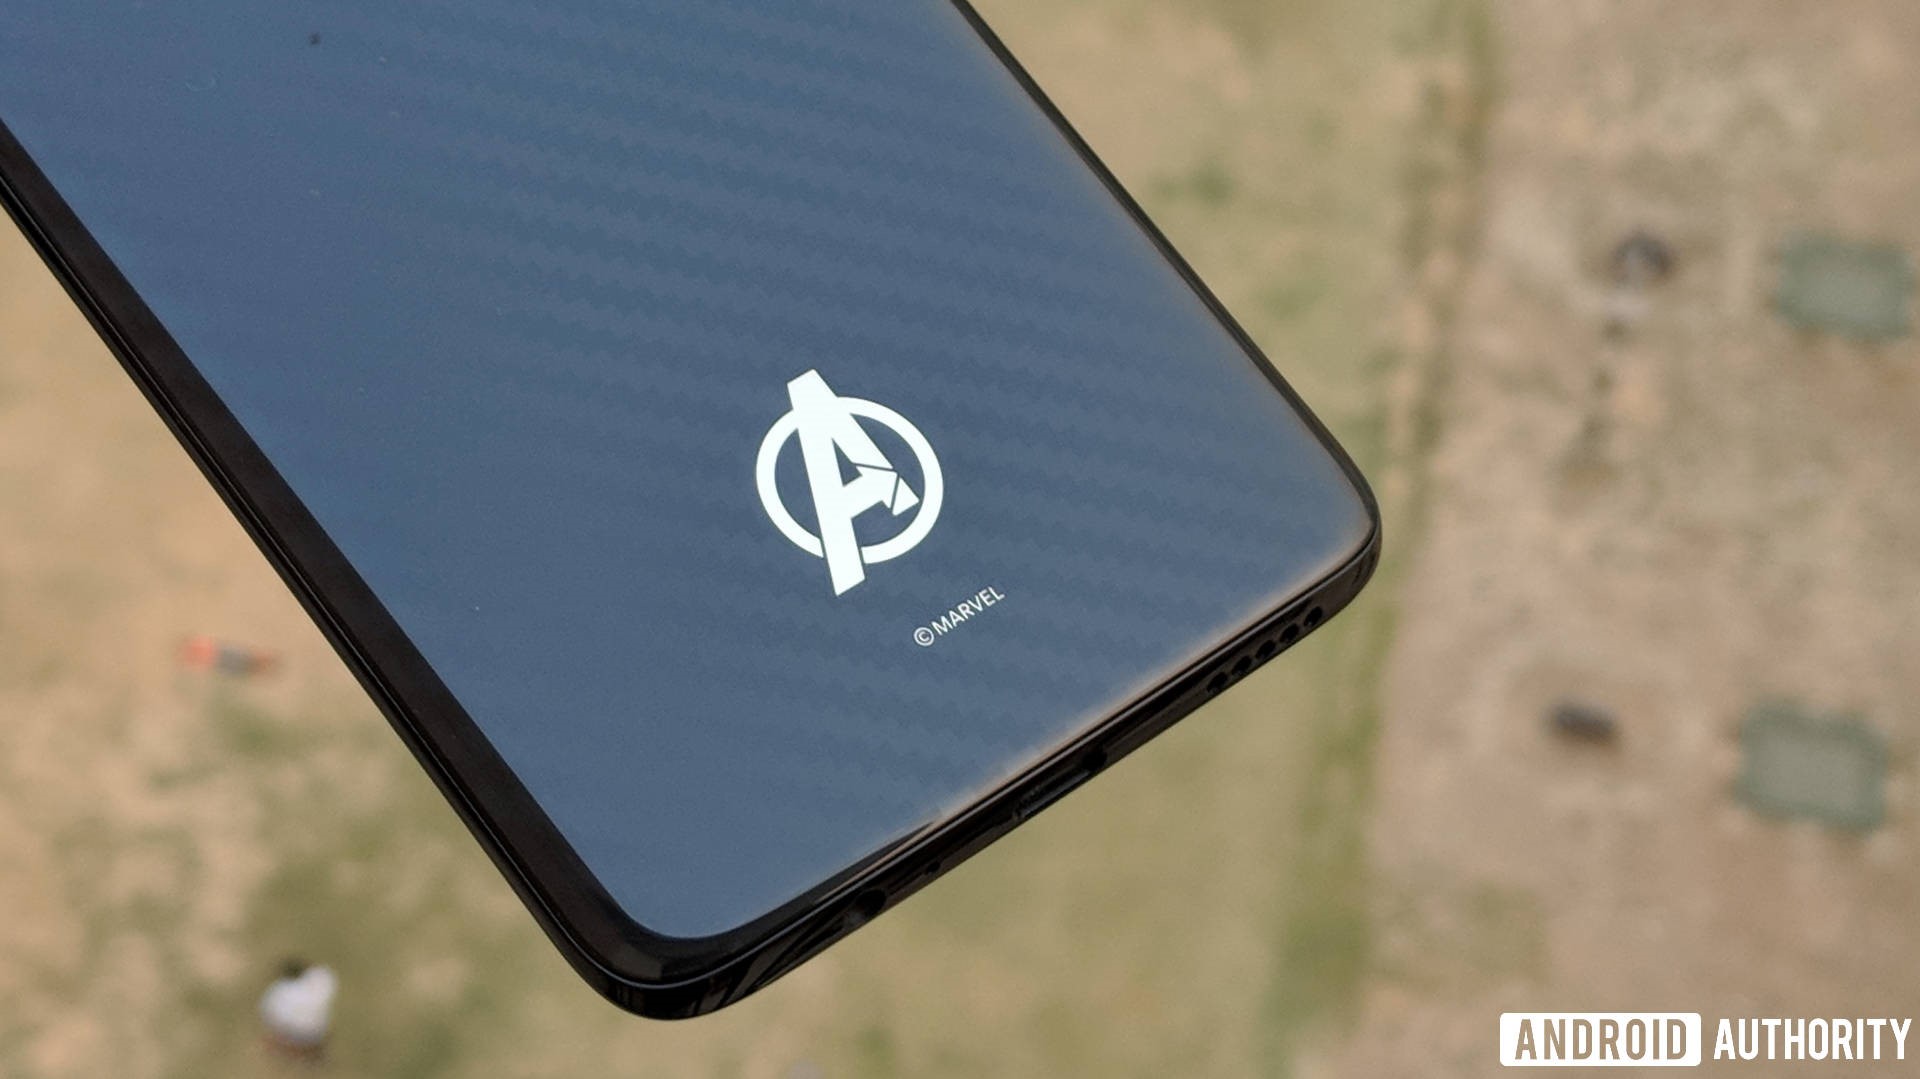 OnePlus 6 Marvel Avengers Limited Edition